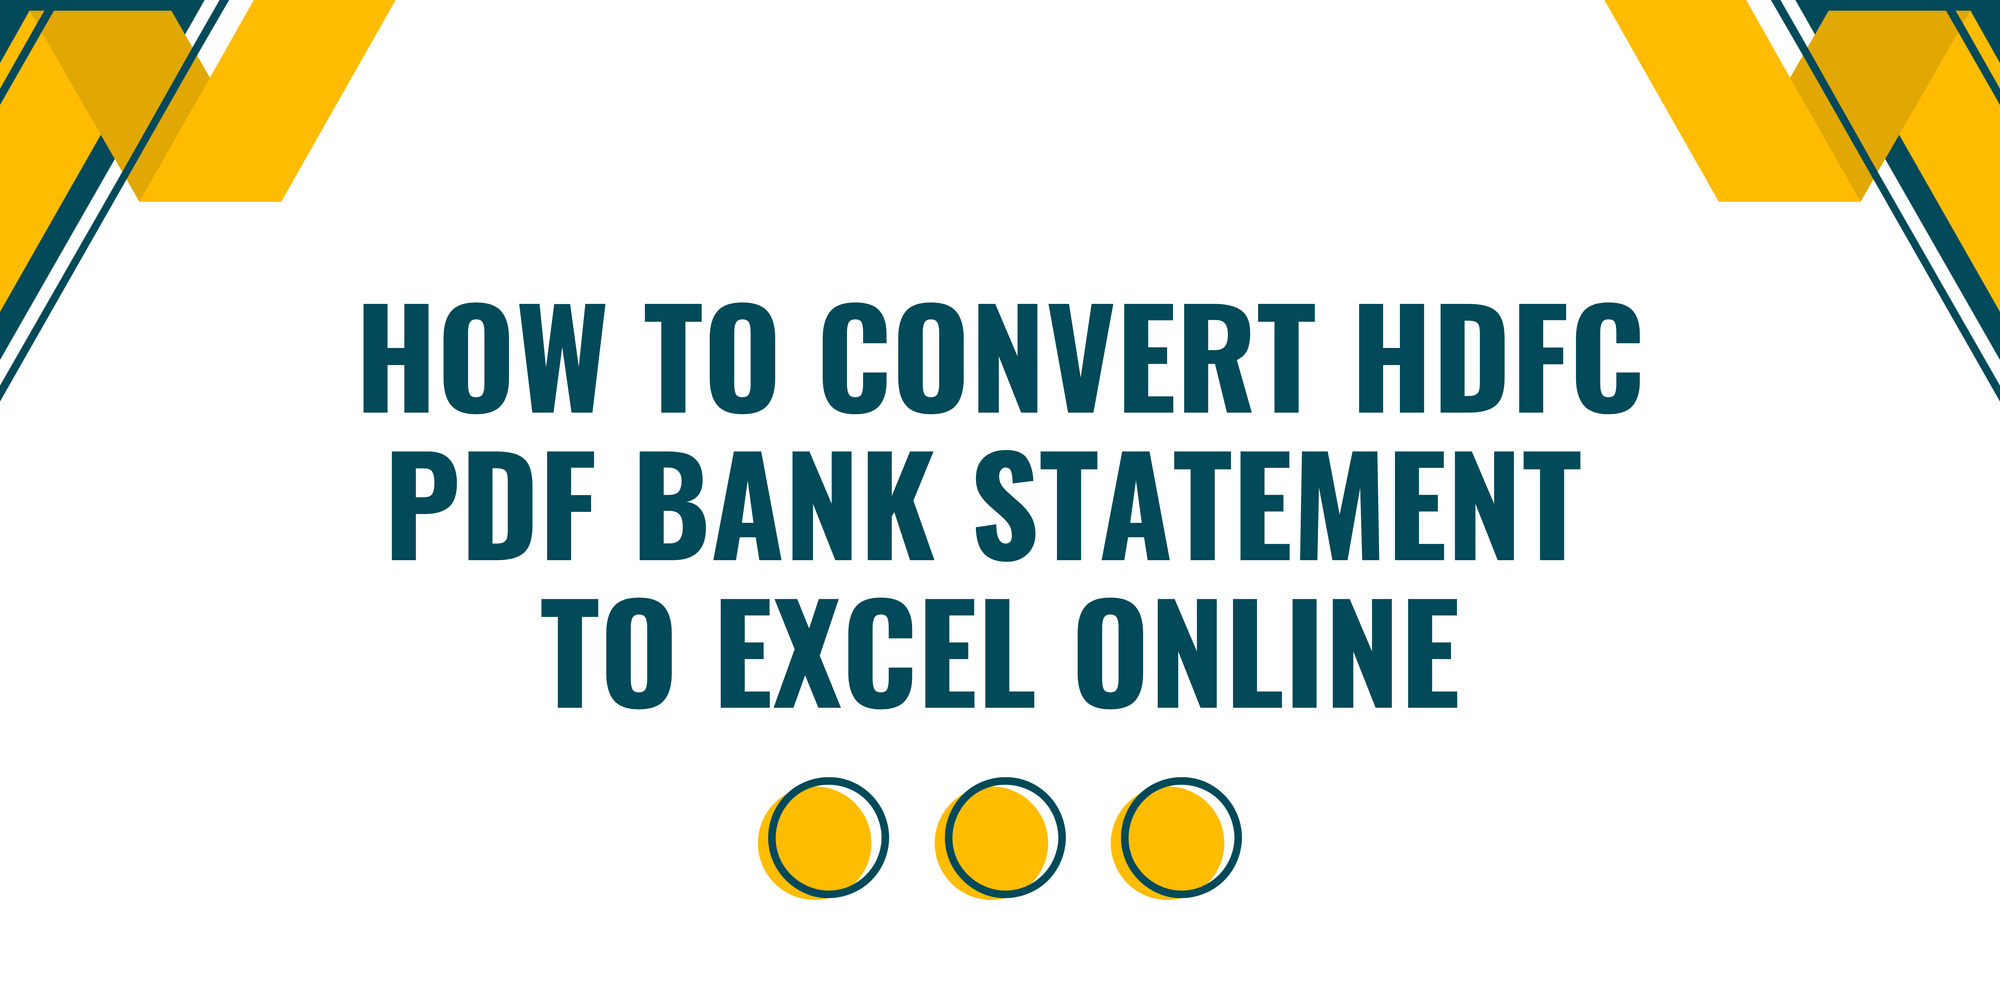 How to Convert HDFC PDF Bank Statement to Excel Online